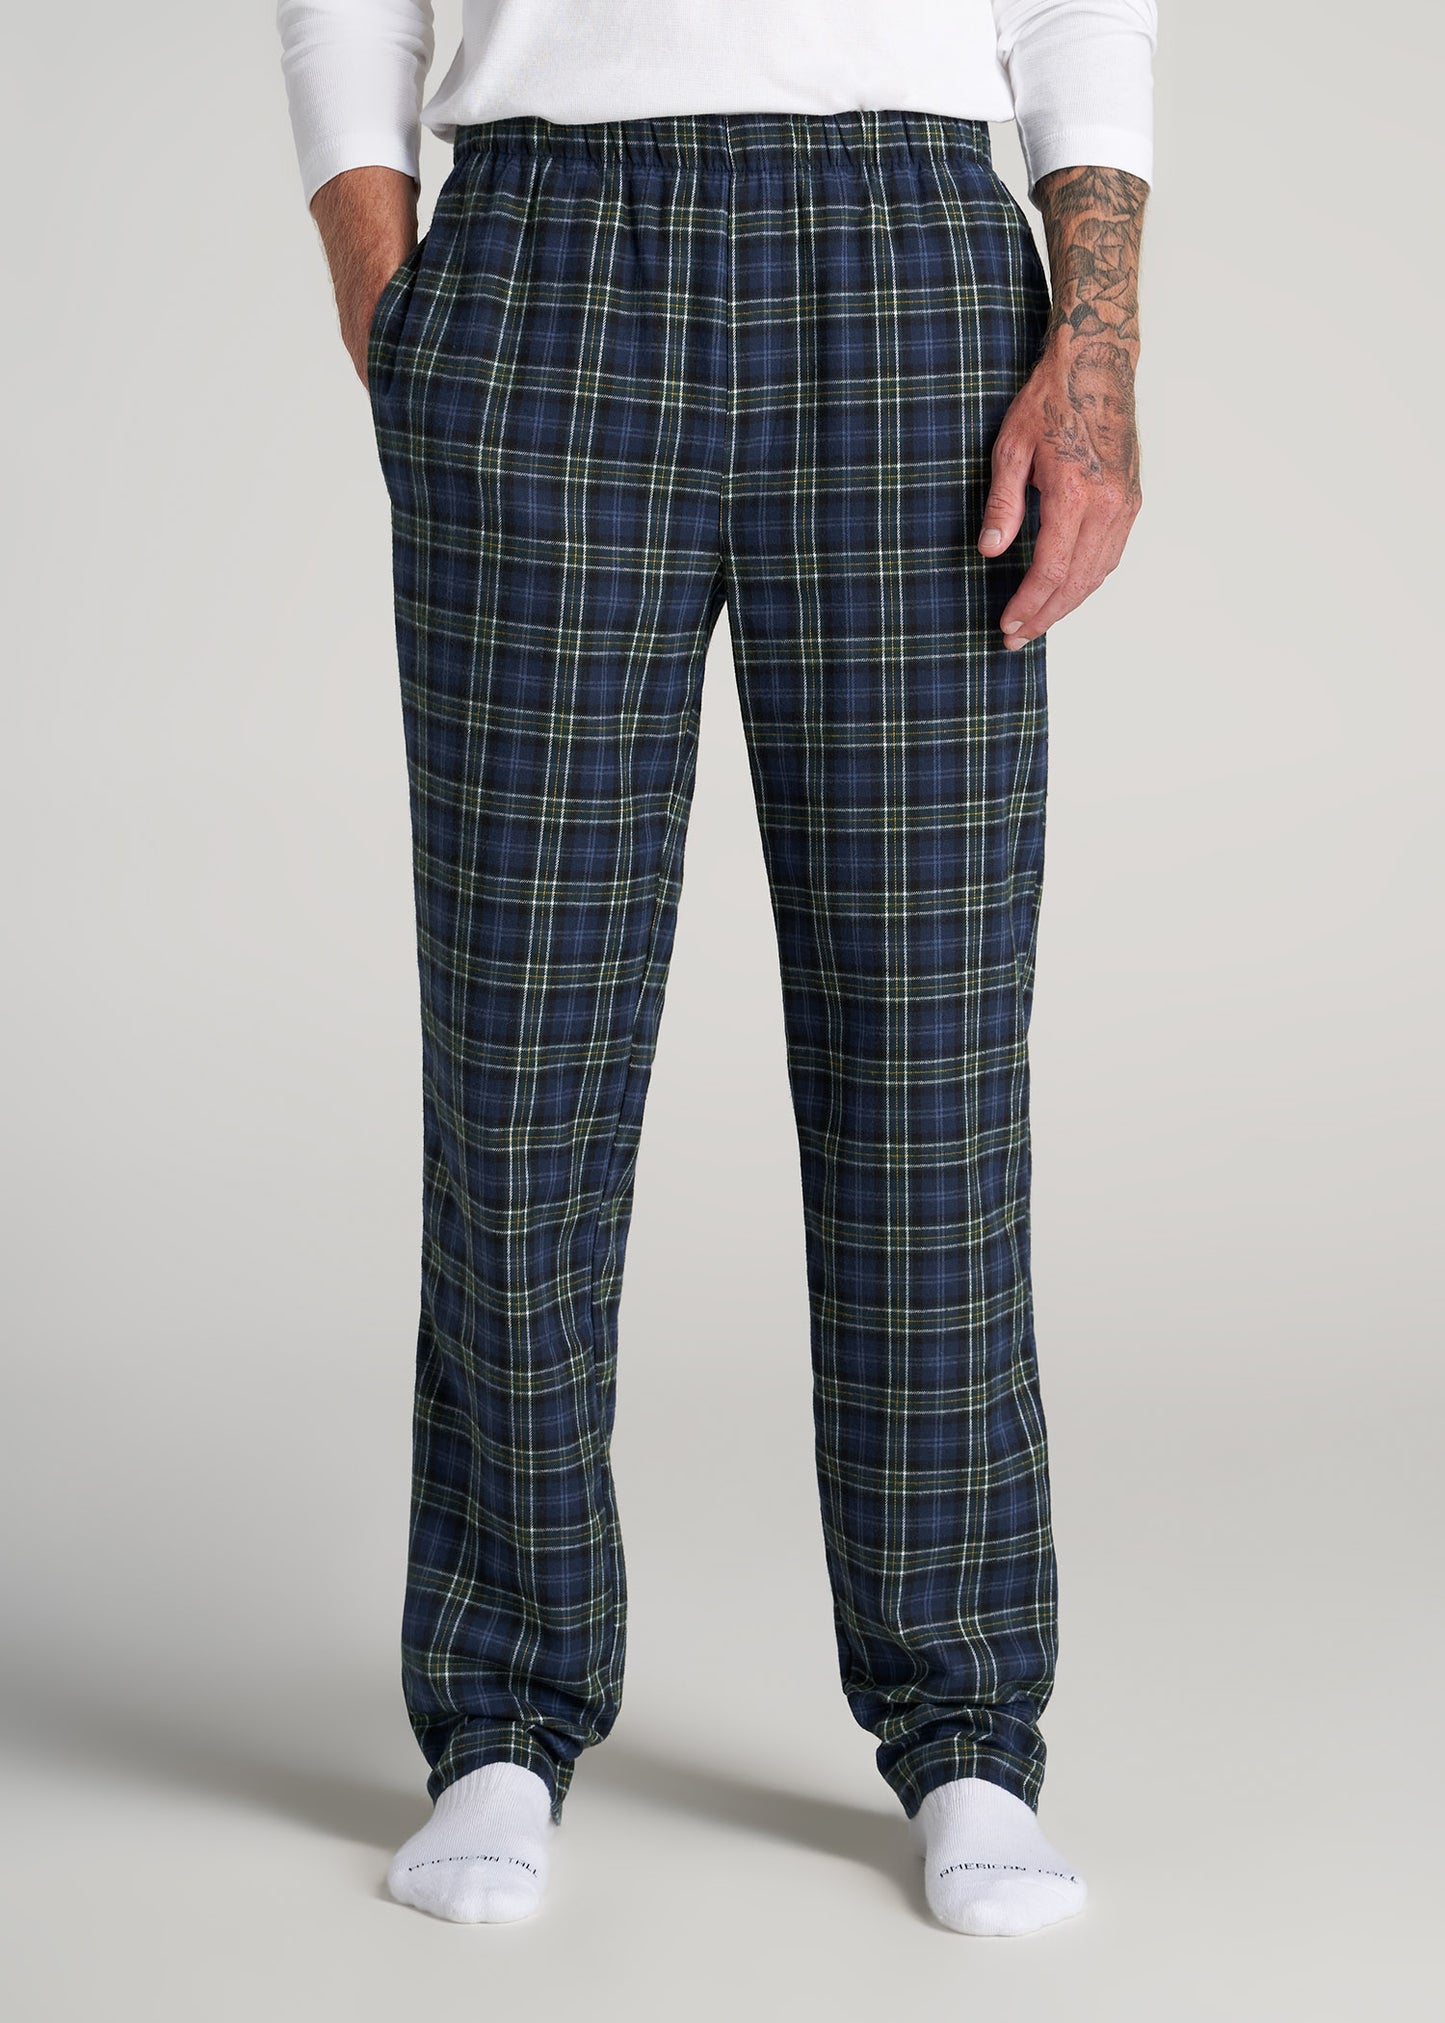    American-Tall-Men-Flannel-Pajamas-Green-Navy-Plaid-front